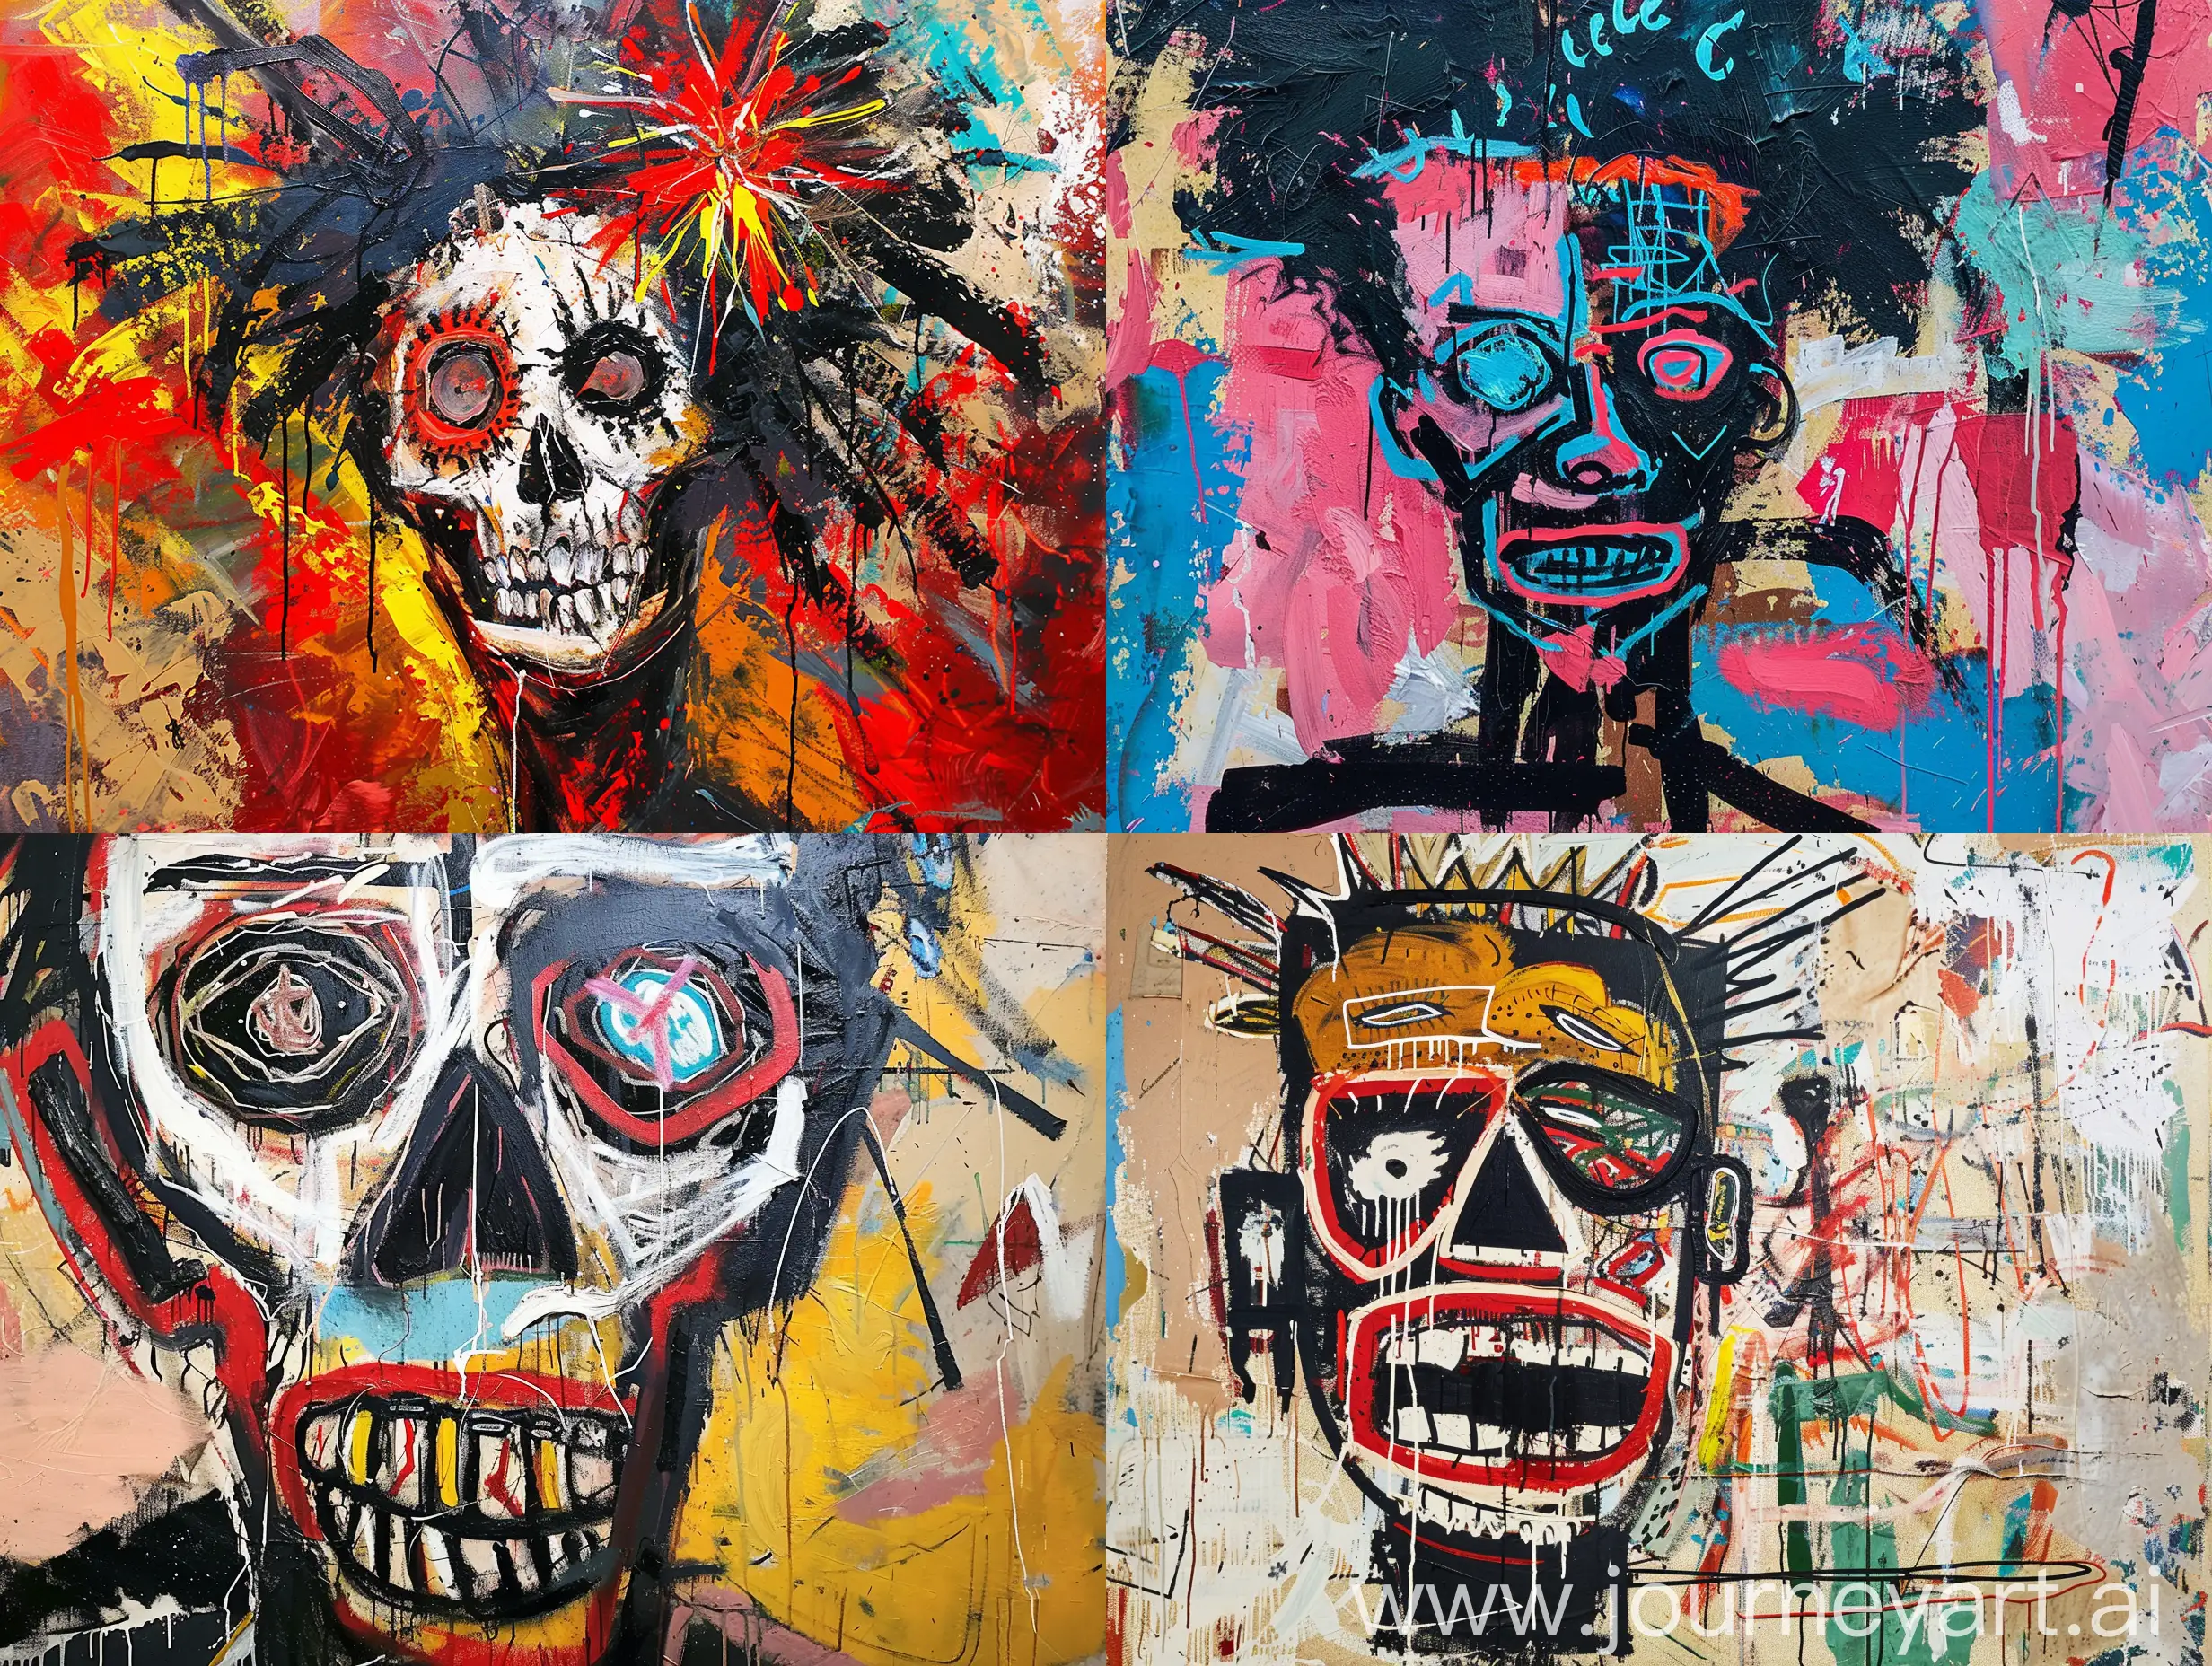 A beautiful magnificent immaculate award winning professional realistic life like voodoo painting in the style of jean michel basquiat 